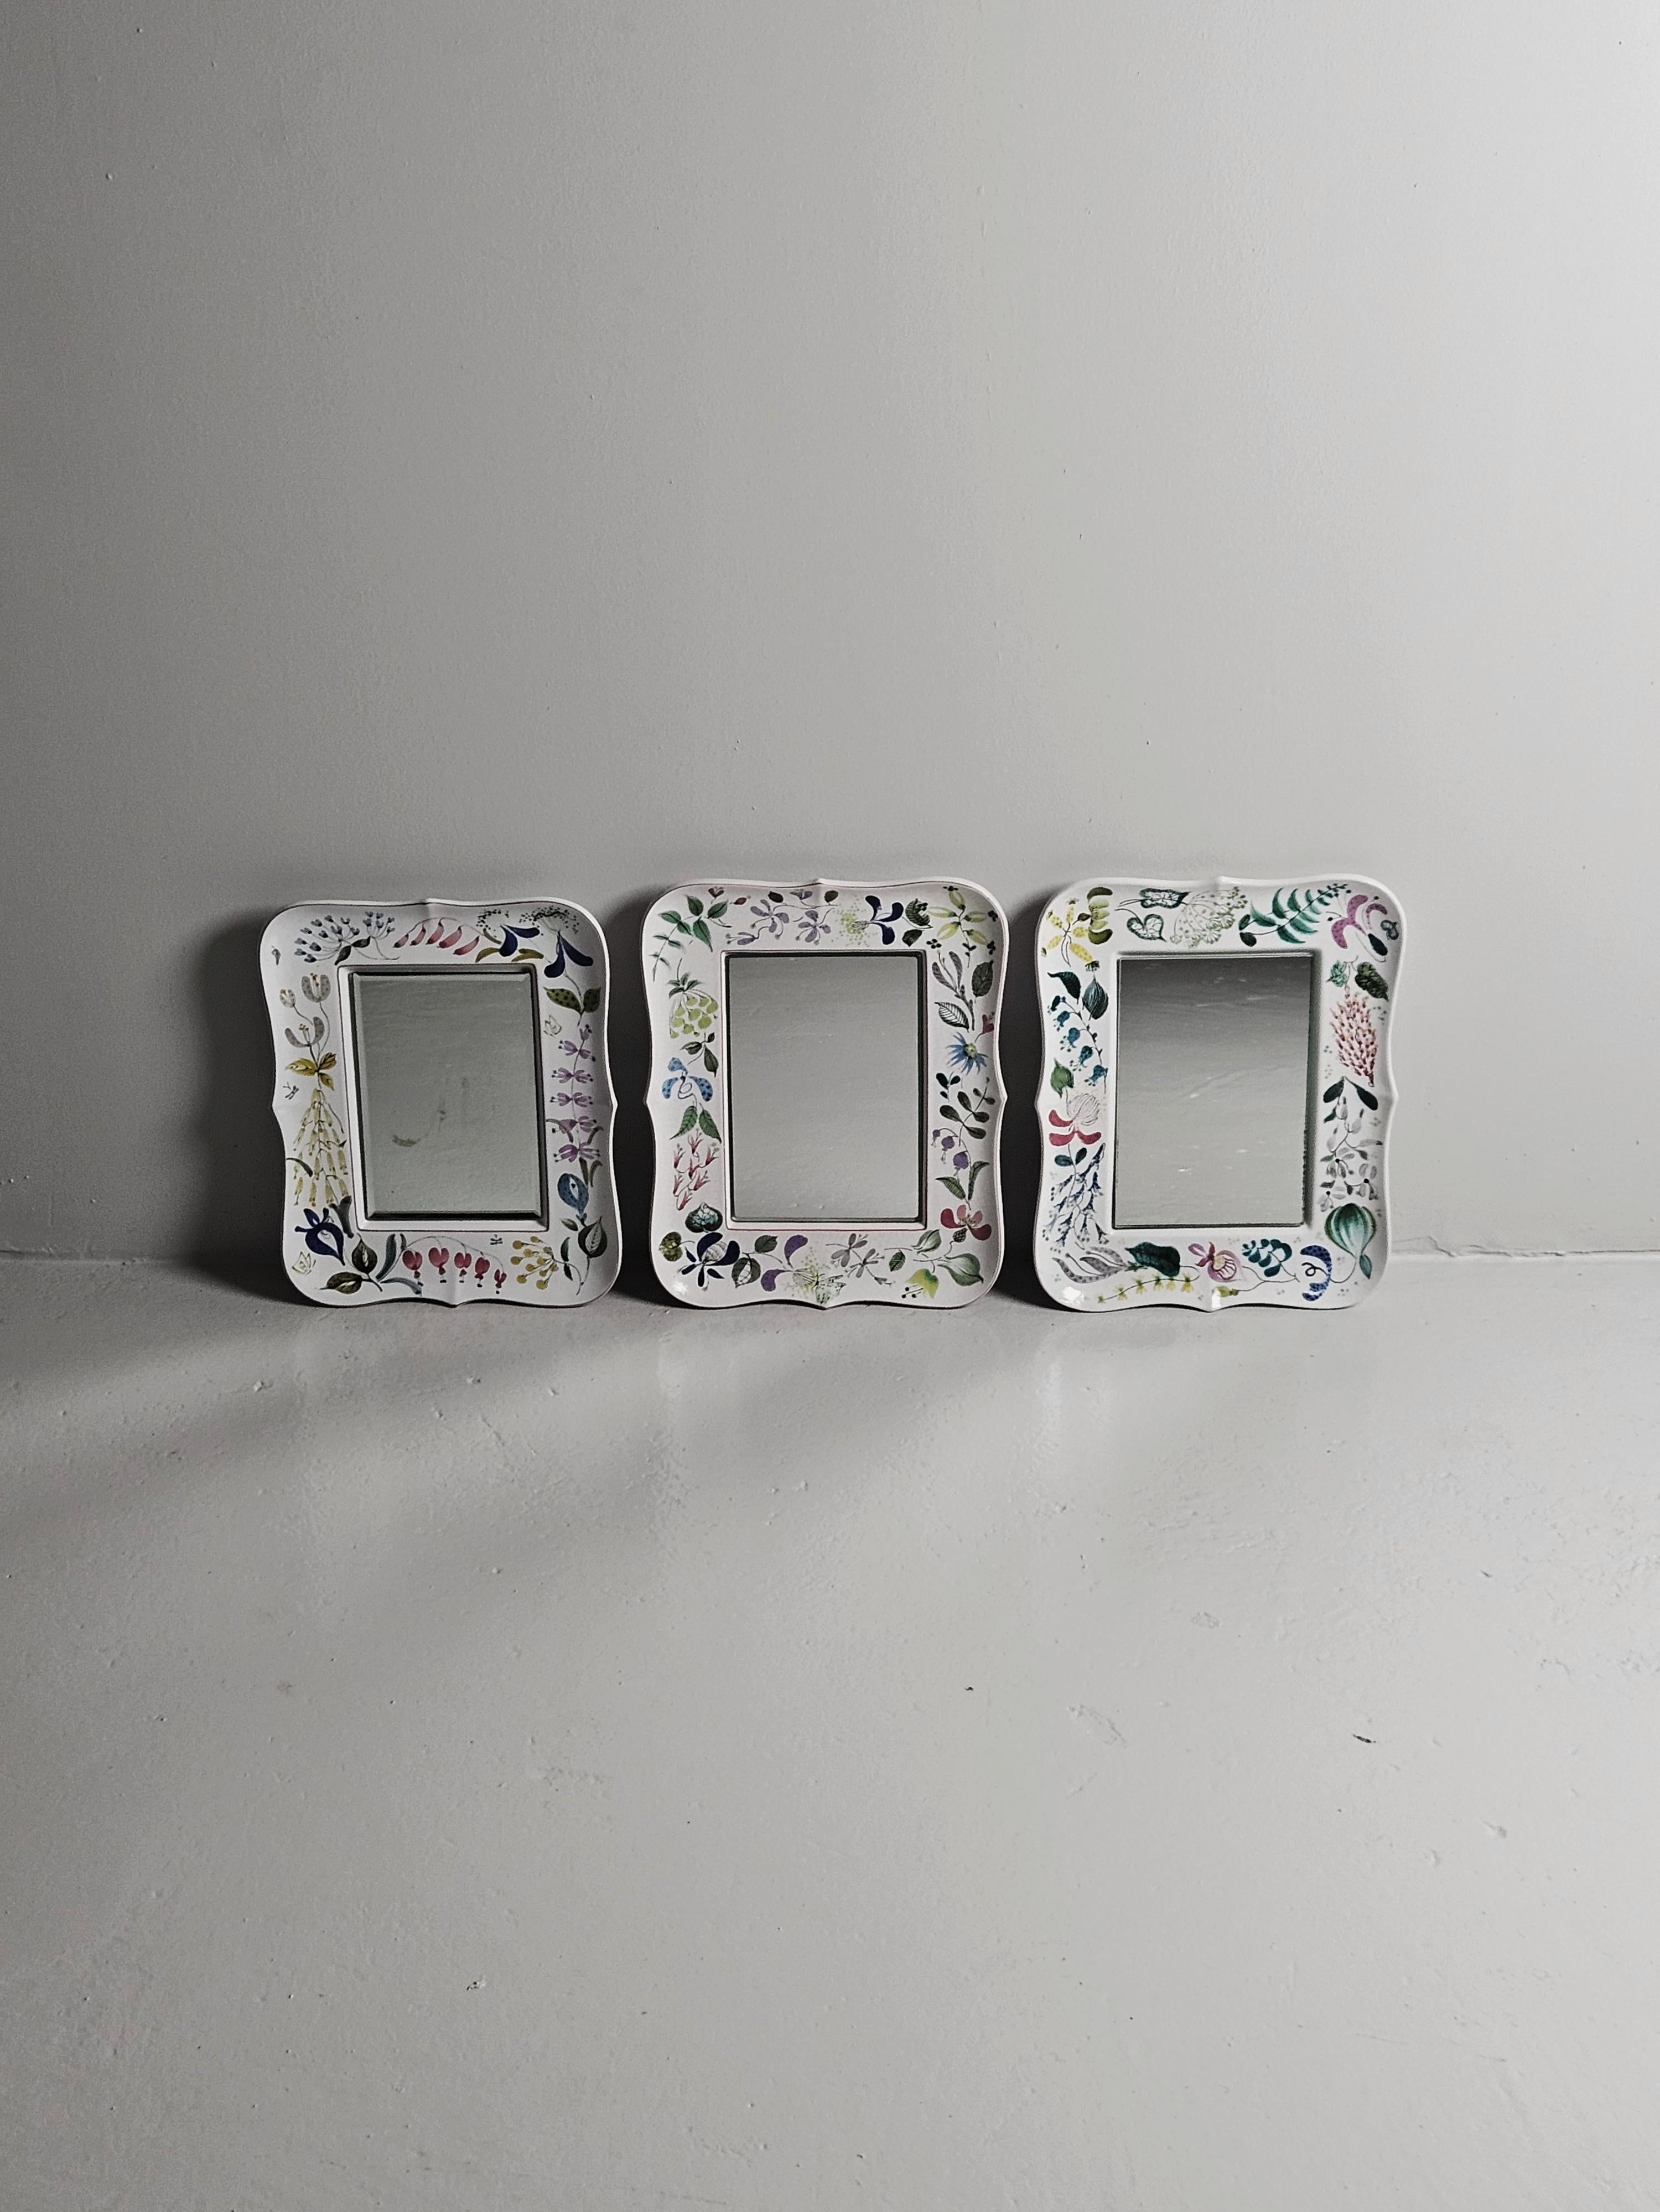 Lovely faience wall mirrors designed by Stig Lindberg. 

Everyone of the mirrors has a different floral painting on them. 

It is possible to hang the mirror horizontally as well as vertically